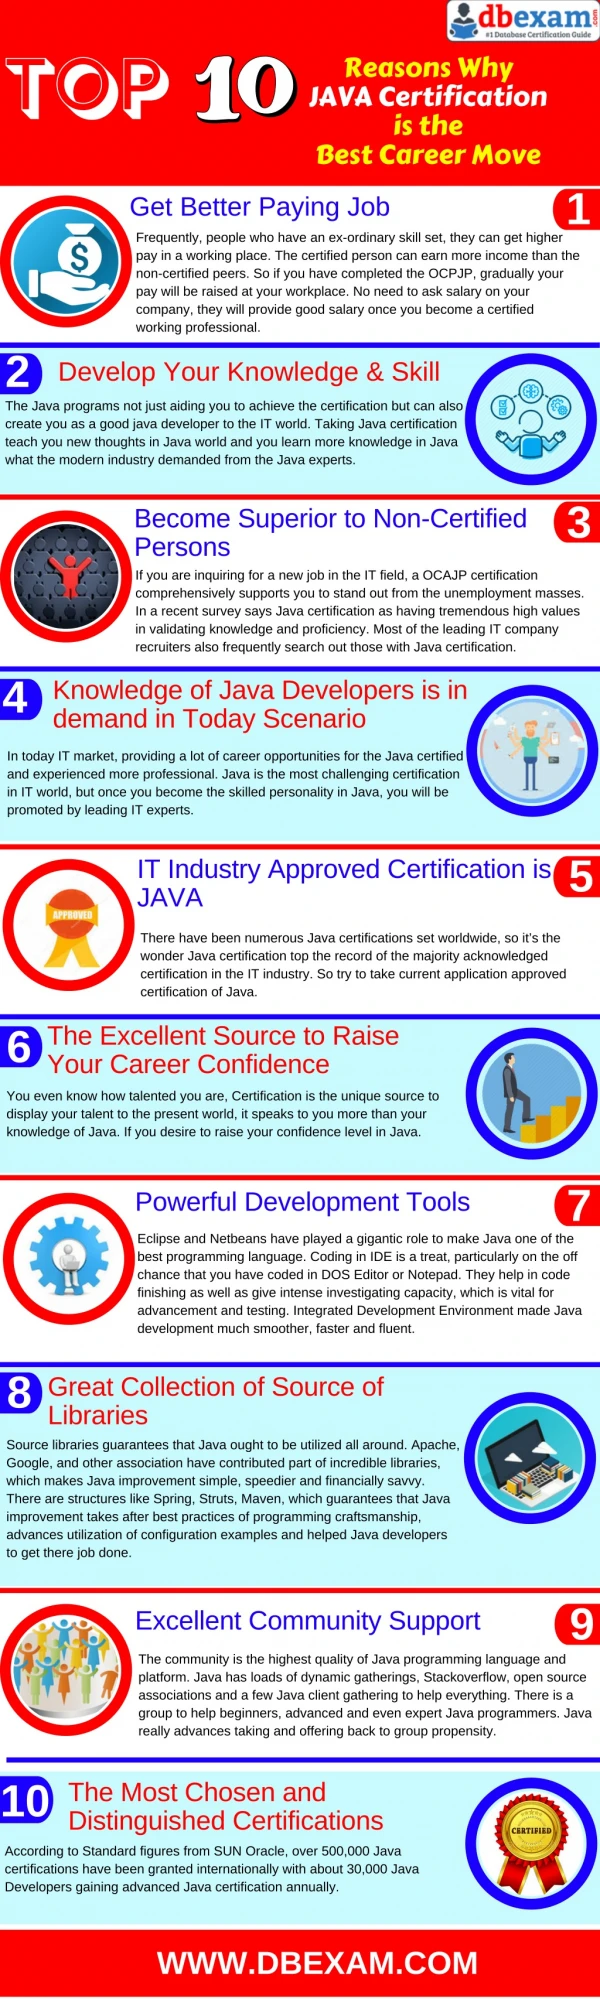 [Infographic] 10 Reasons Why JAVA Certification is The Best Career Move